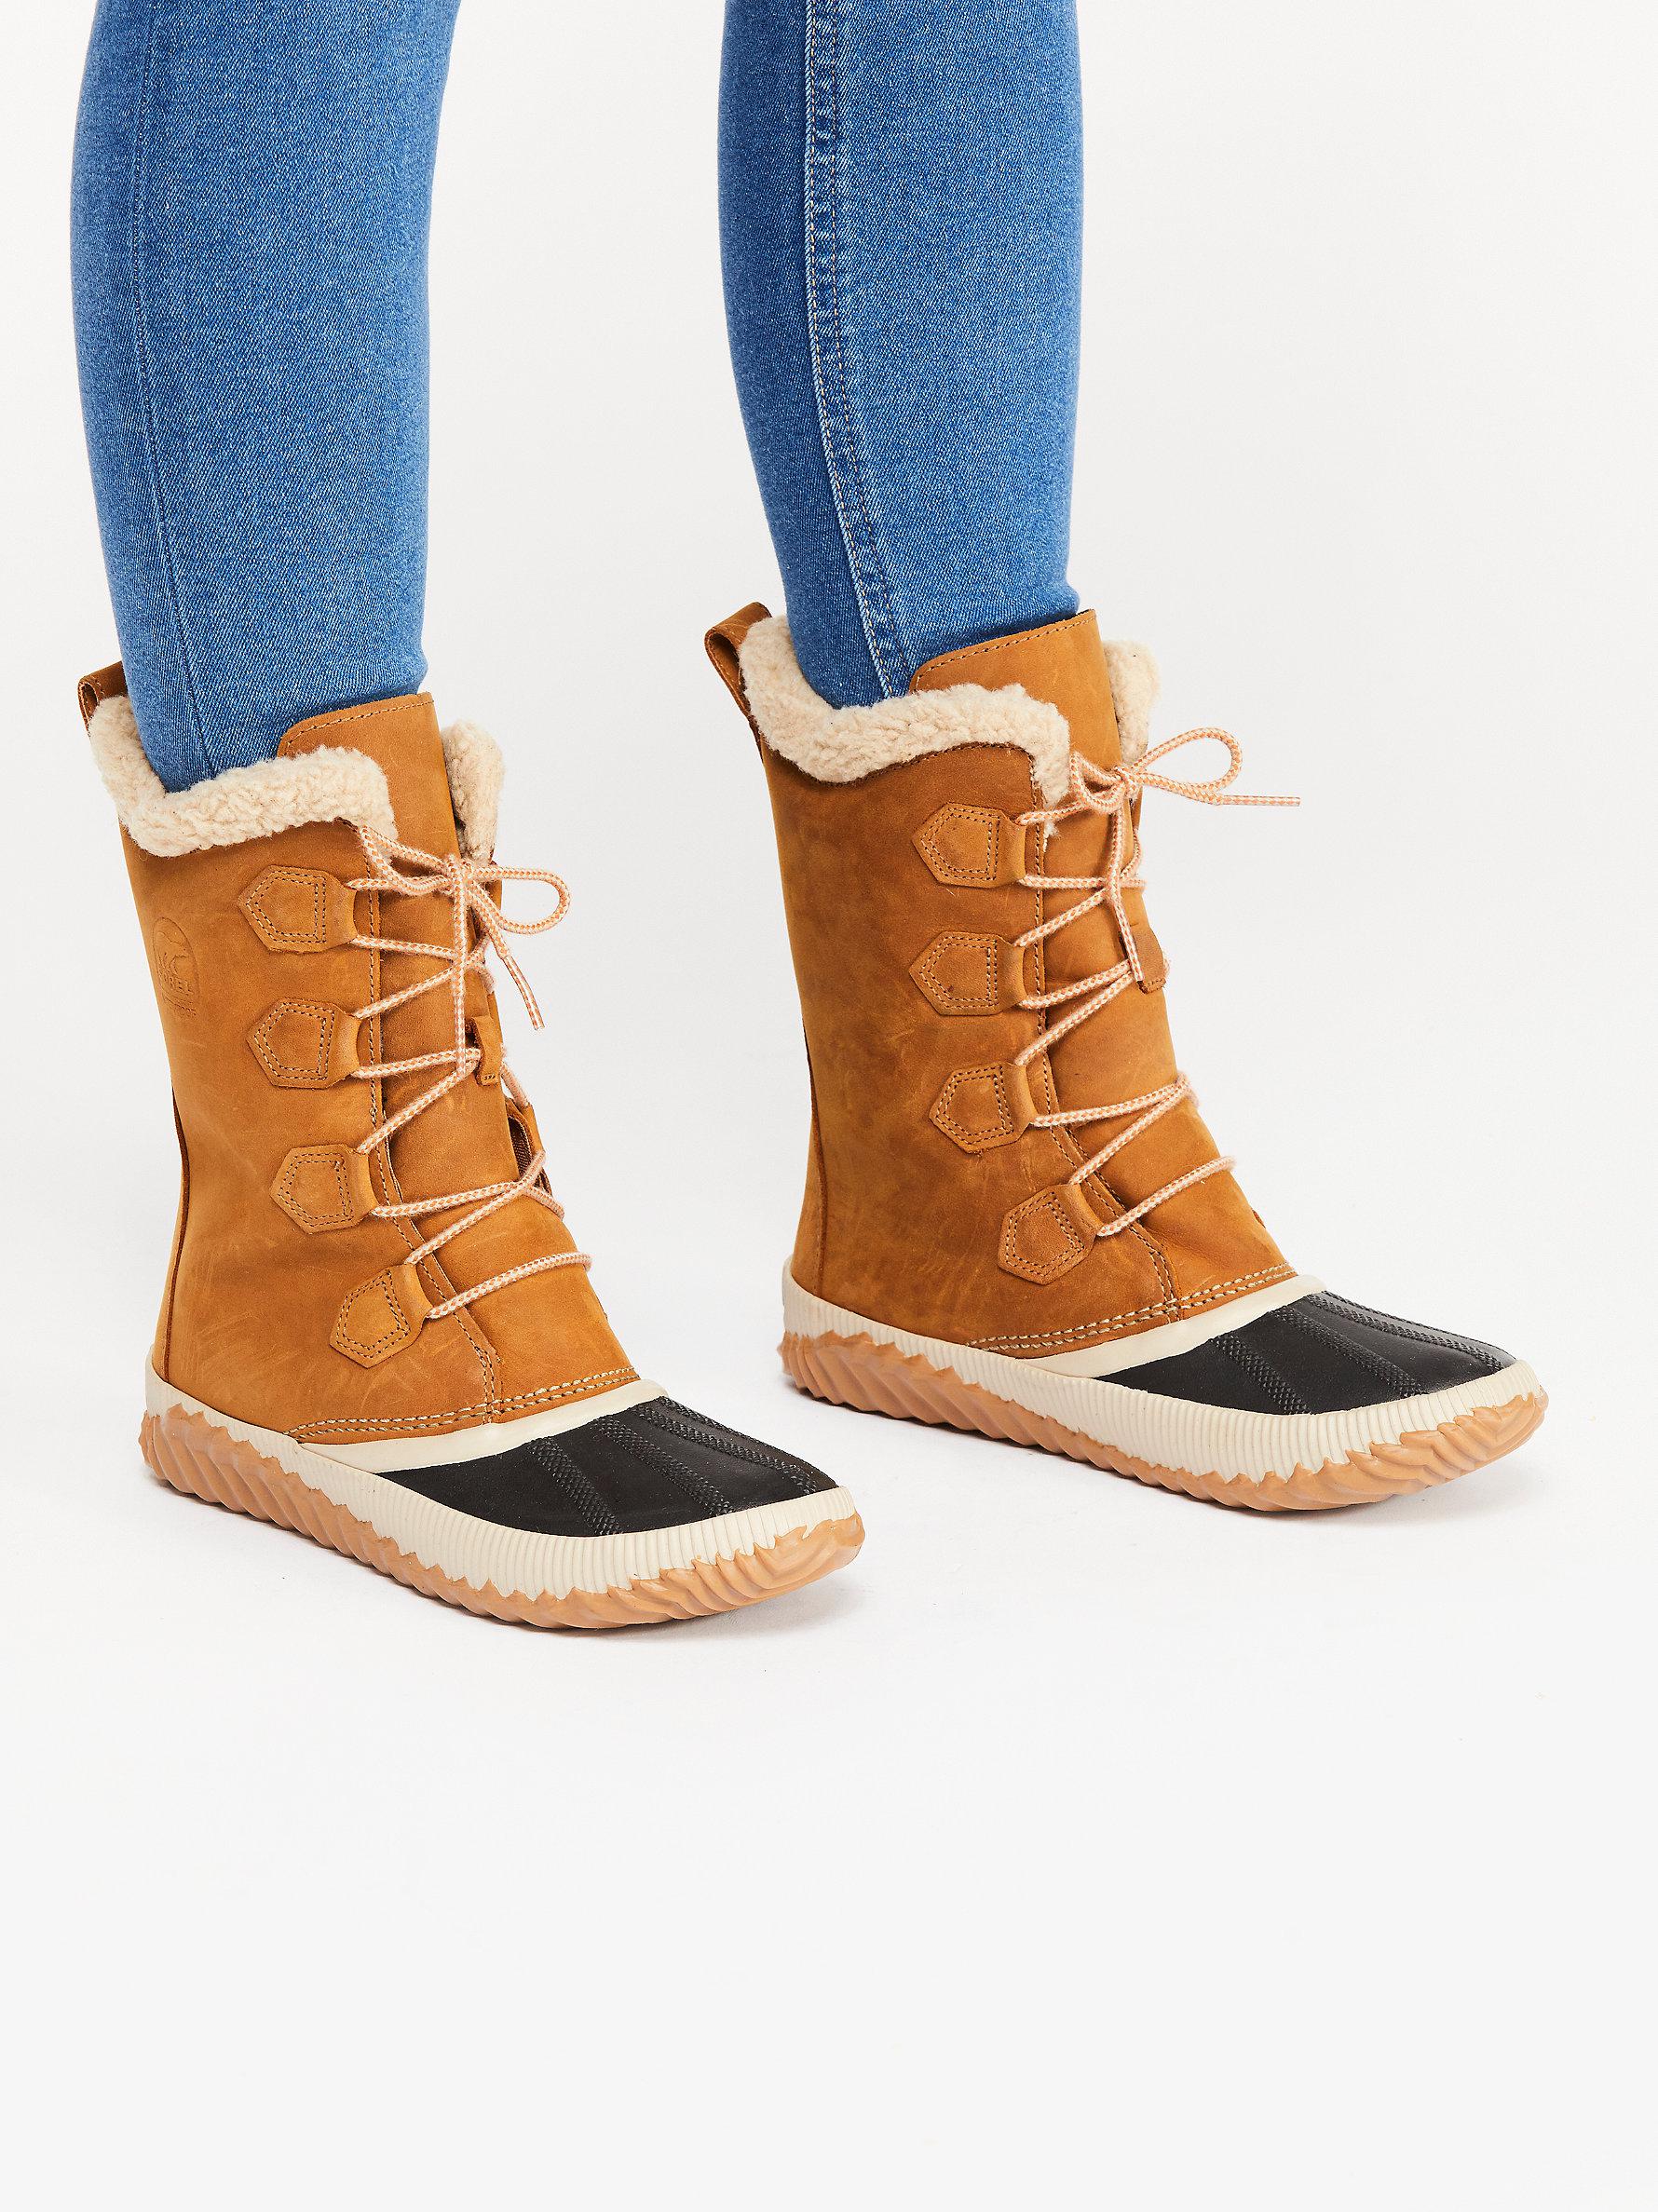 Tall Weather Boot By Sorel in Tan 